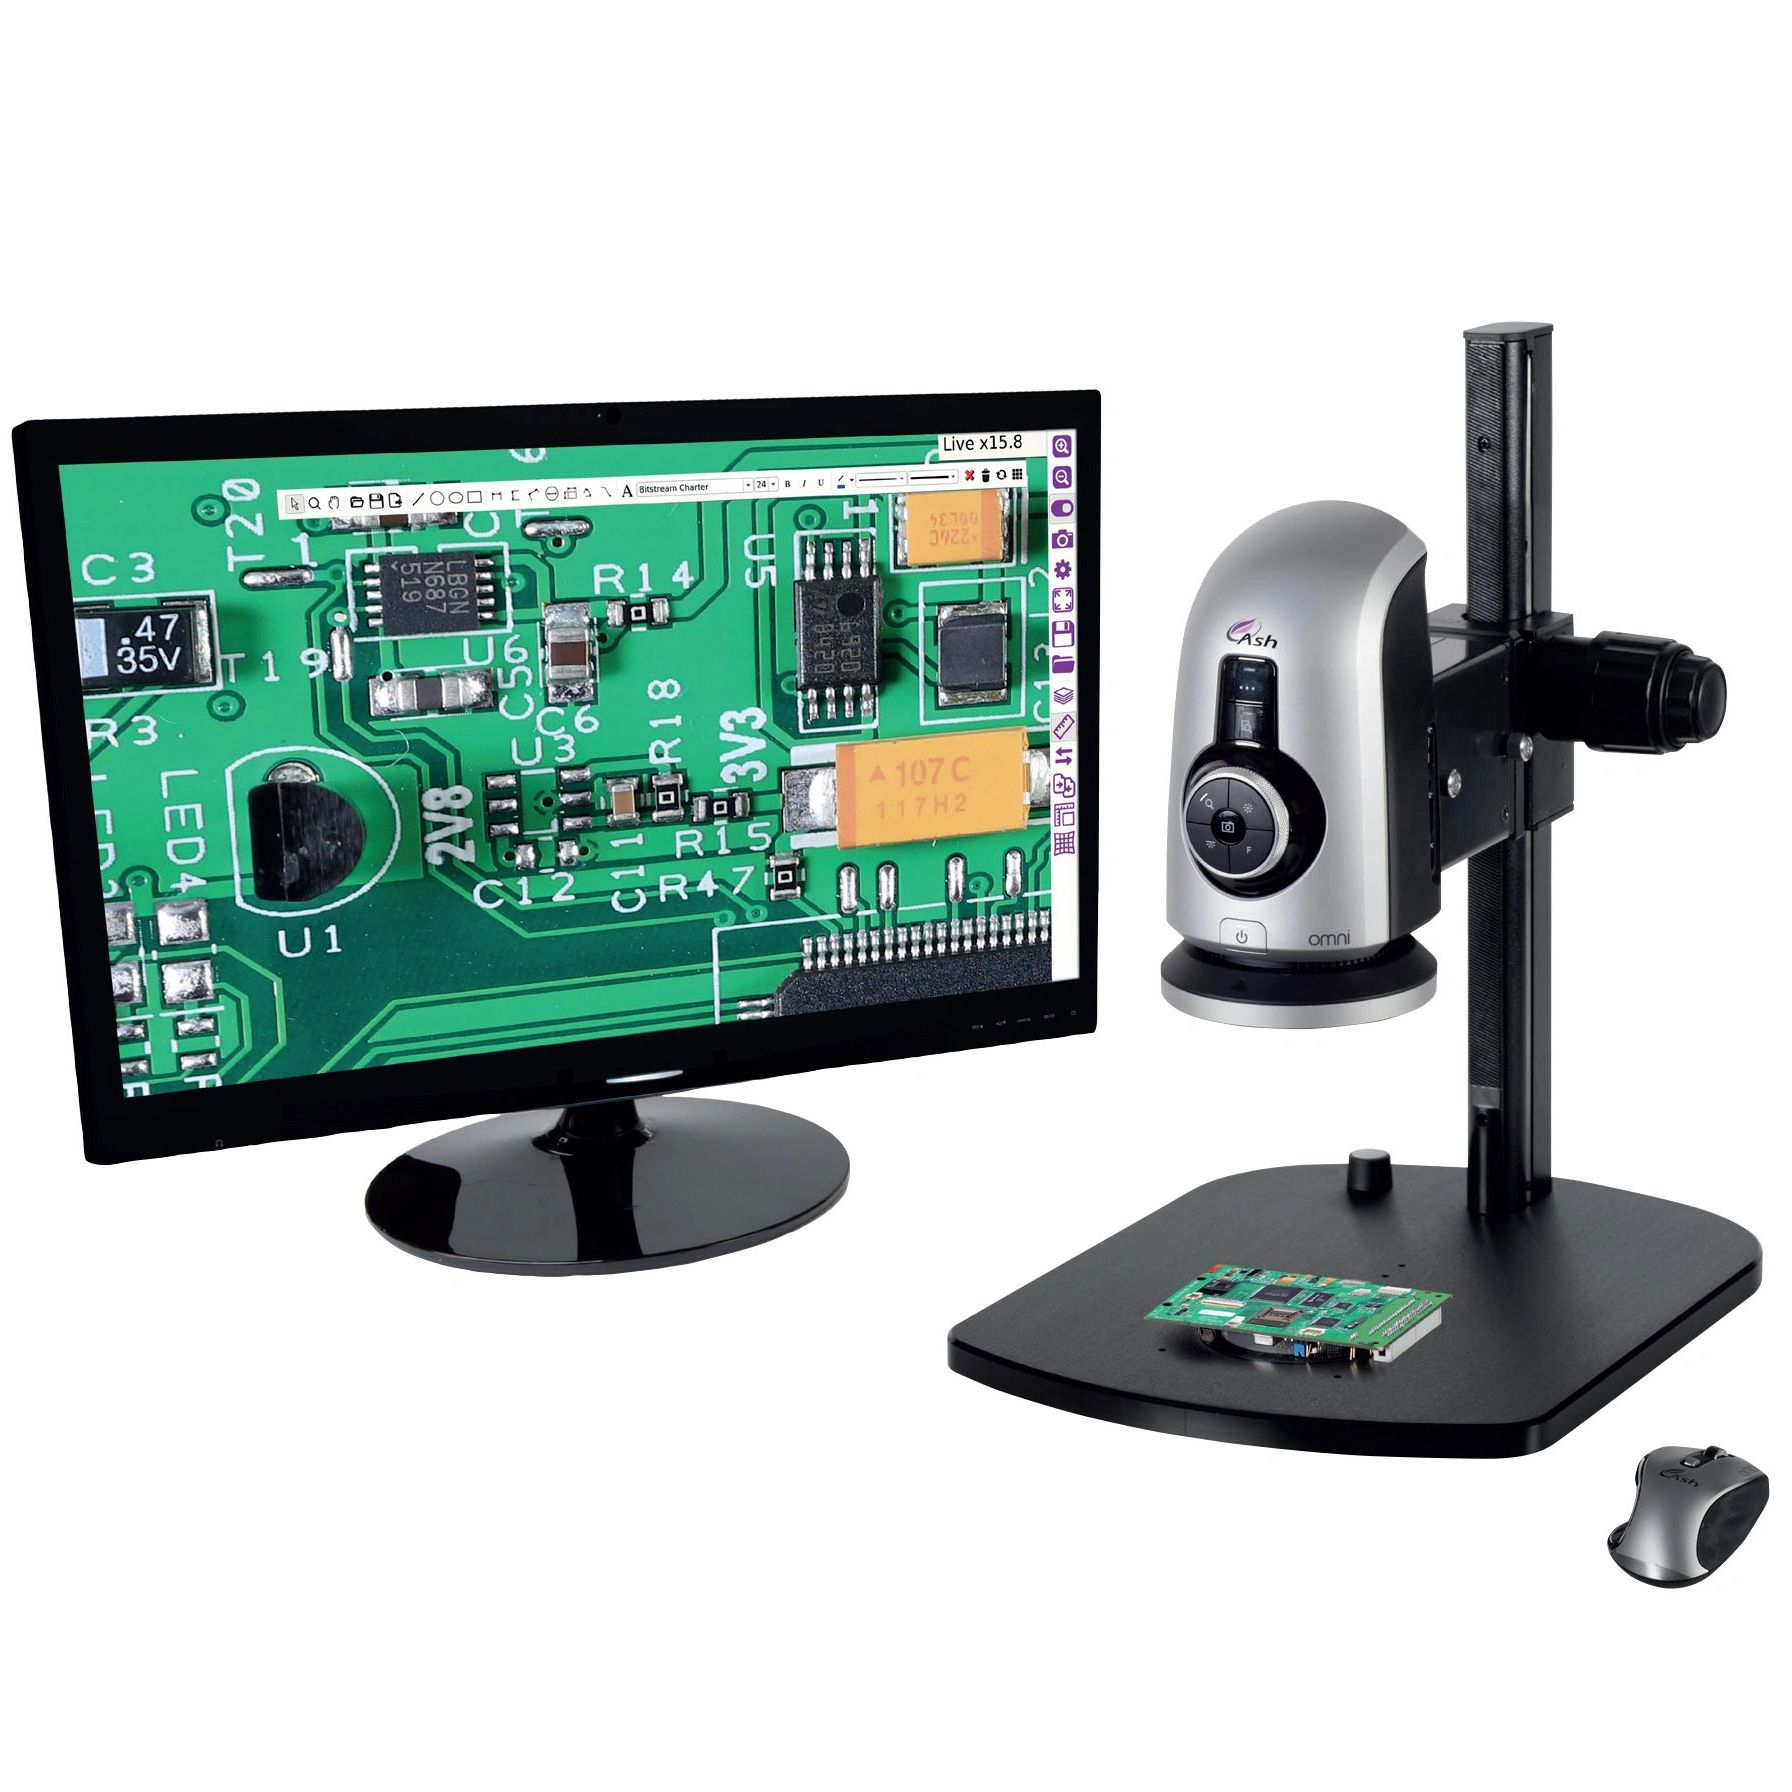 Video Inspection setup with monitor